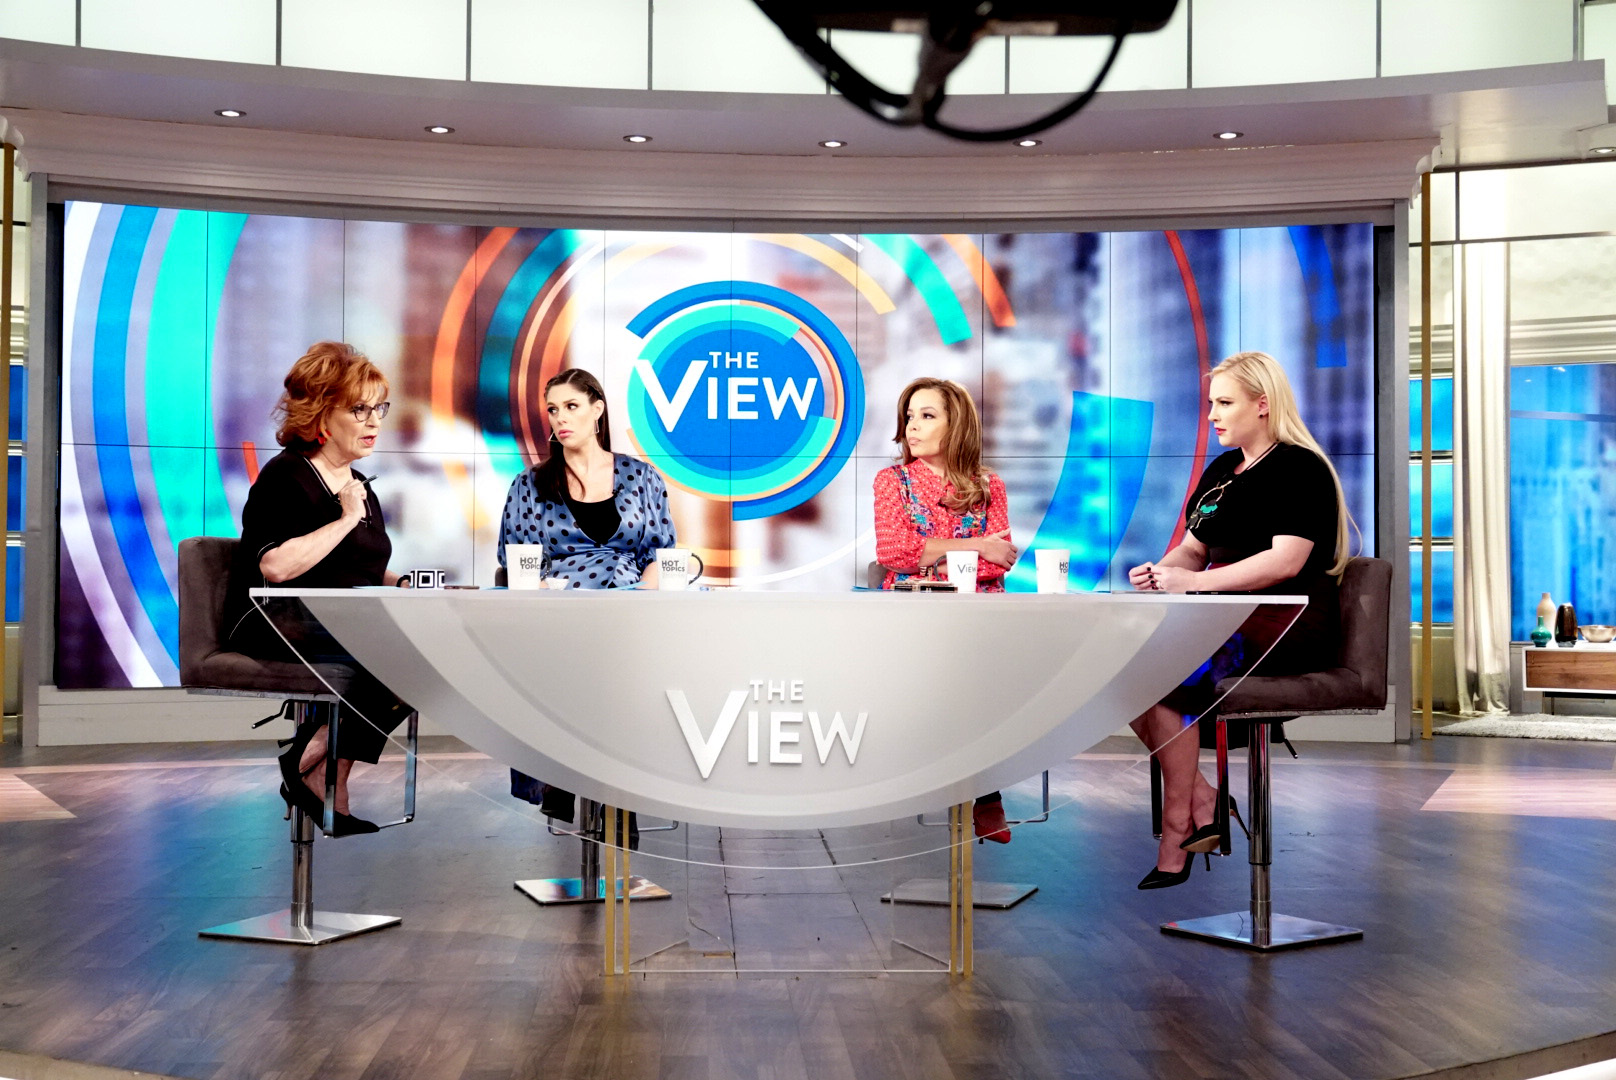 PHOTO: "The View" co-hosts Joy Behar, Abby Huntsman, Sunny Hostin, and Meghan McCain weigh in on expectations for performers to be politically active. 